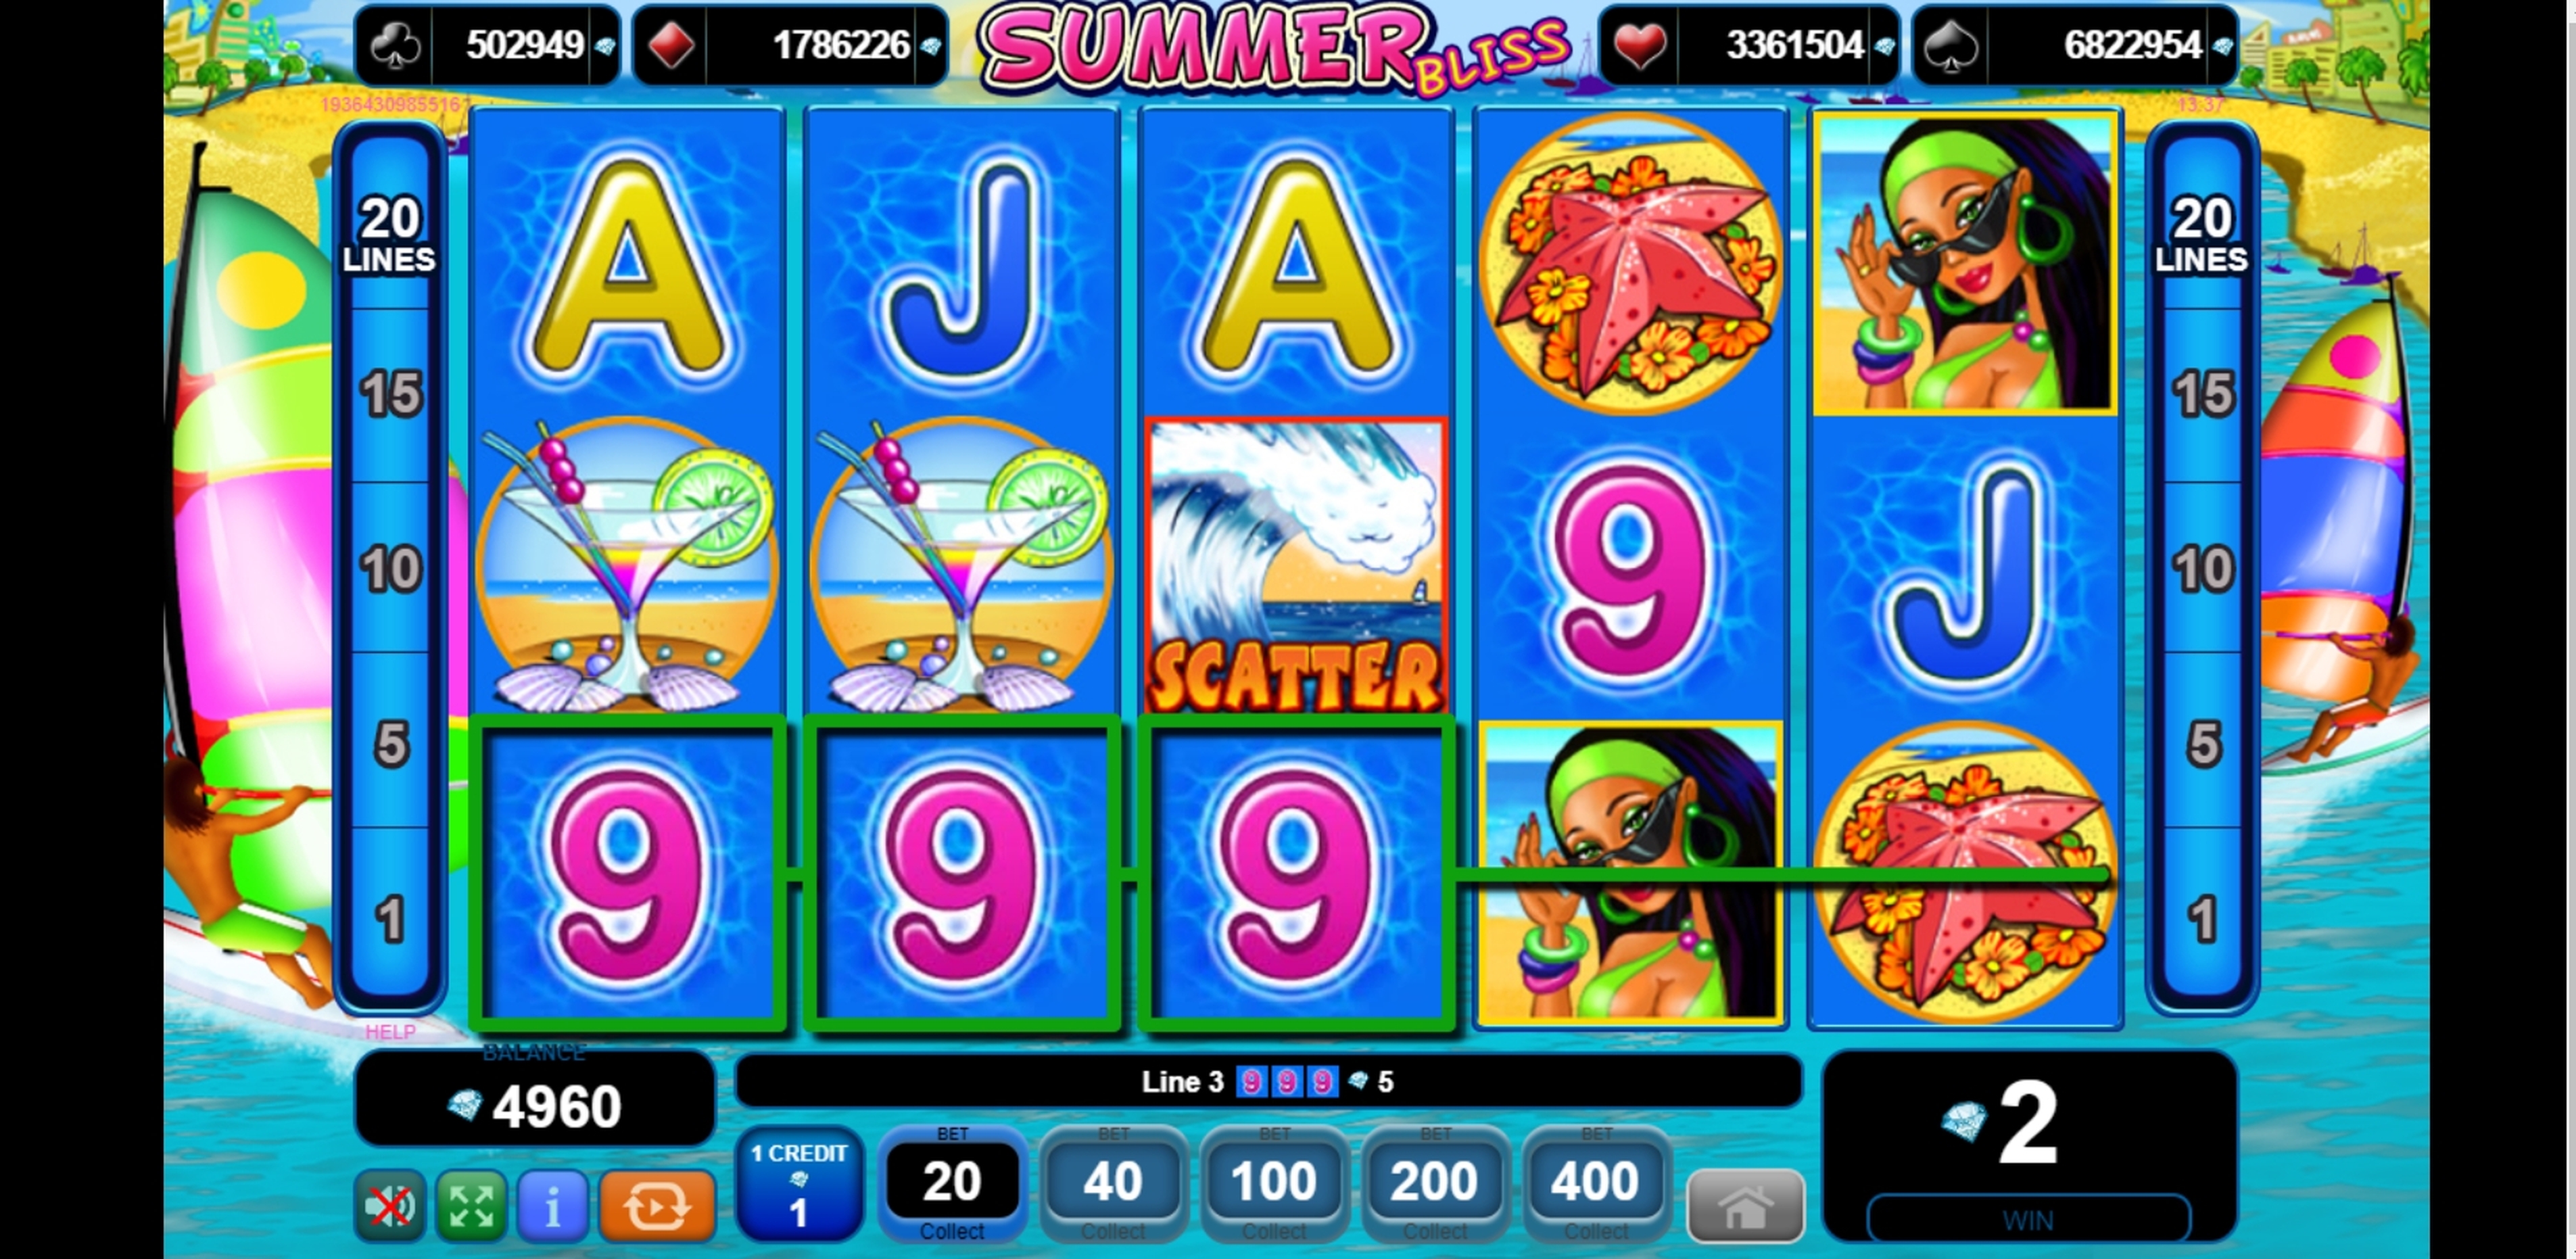 Win Money in Summer Bliss Free Slot Game by EGT